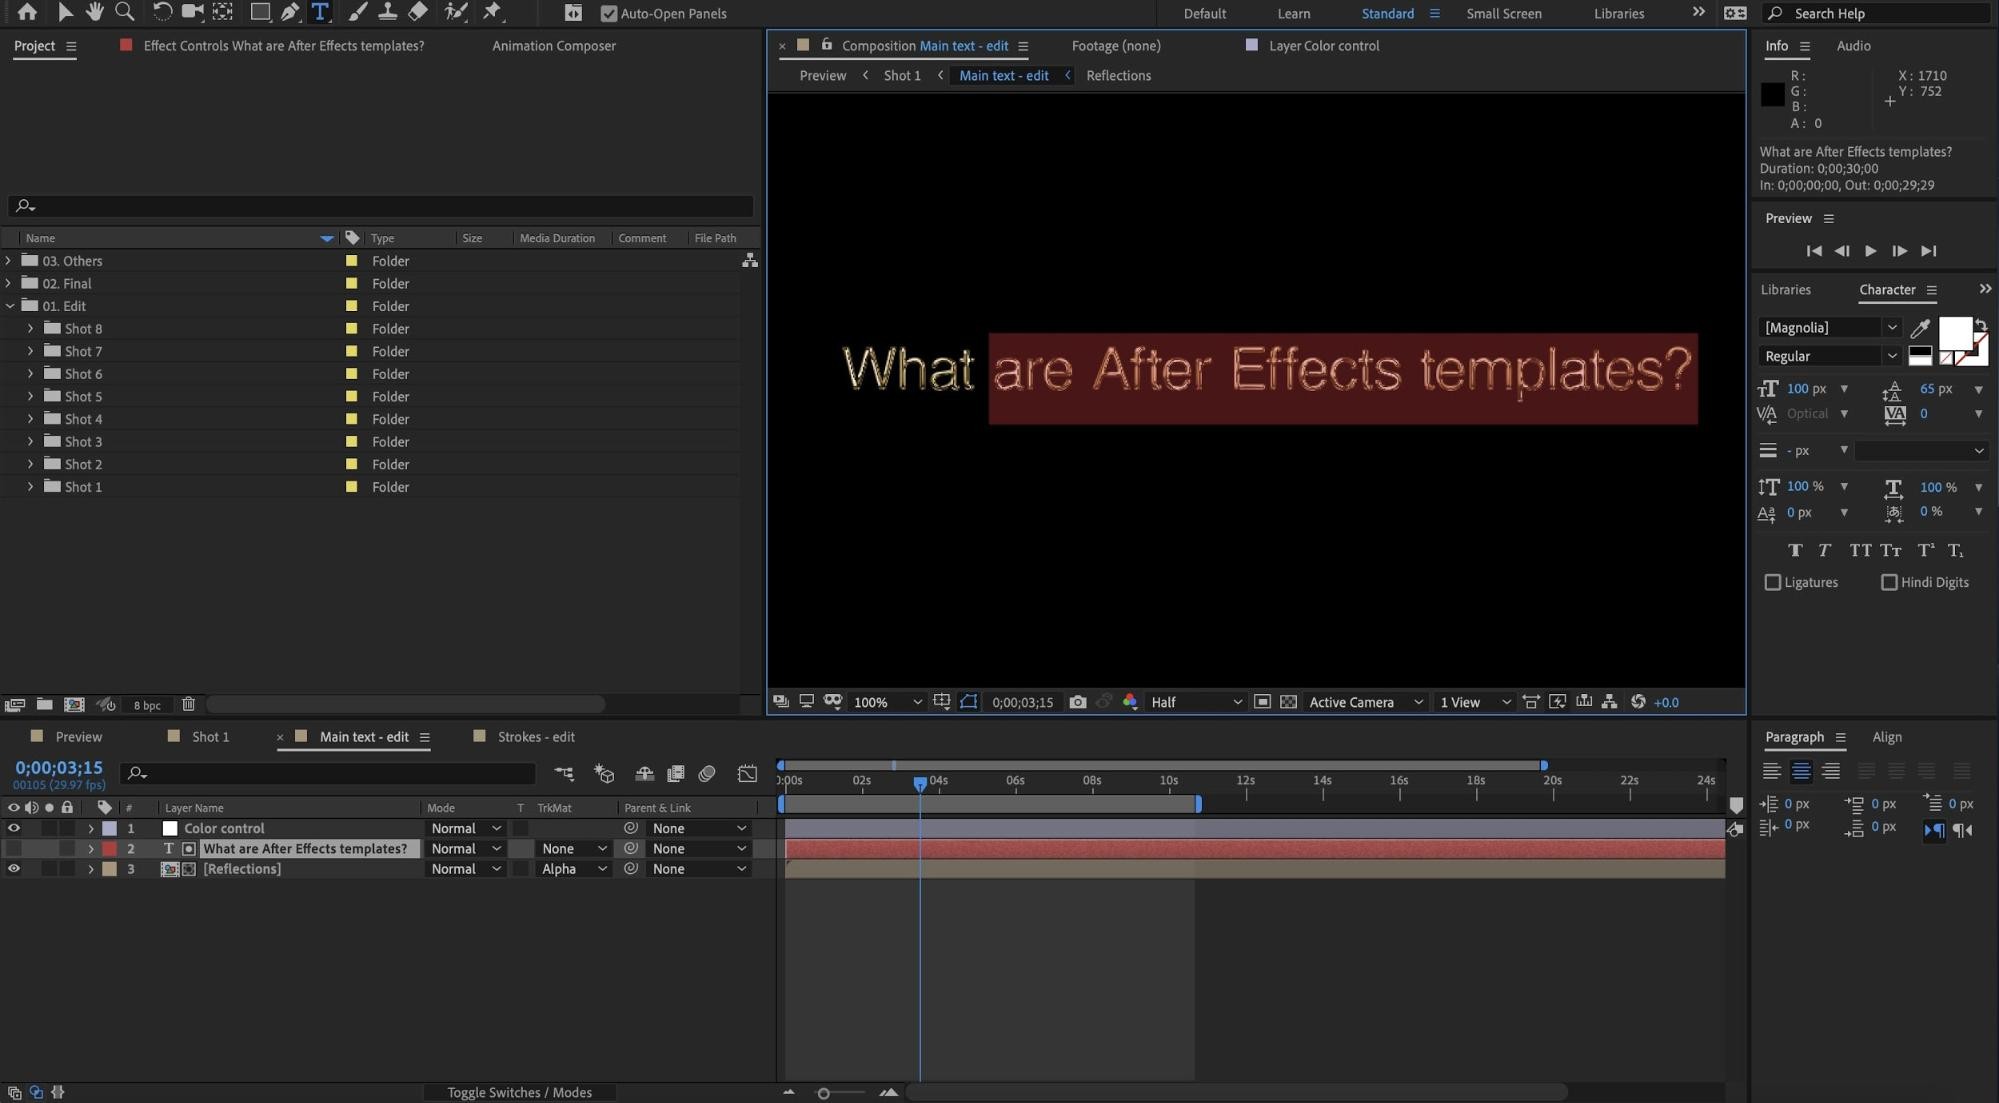 What are "After Effects templates" ?